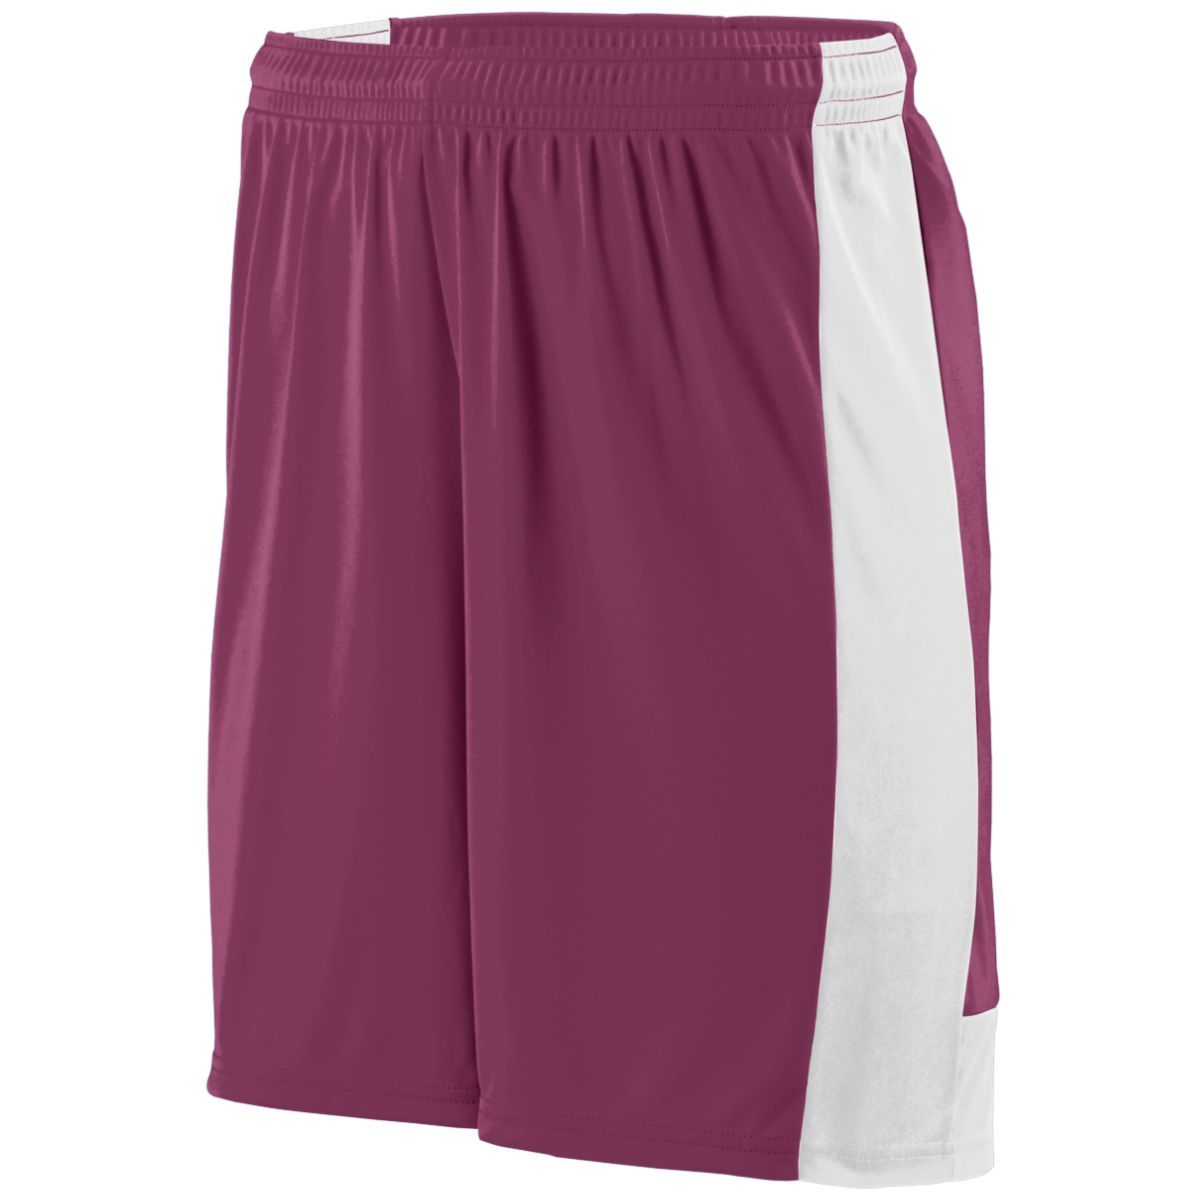 Augusta Sportswear Youth Lightning Shorts in Maroon/White  -Part of the Youth, Youth-Shorts, Augusta-Products, Soccer, All-Sports-1 product lines at KanaleyCreations.com